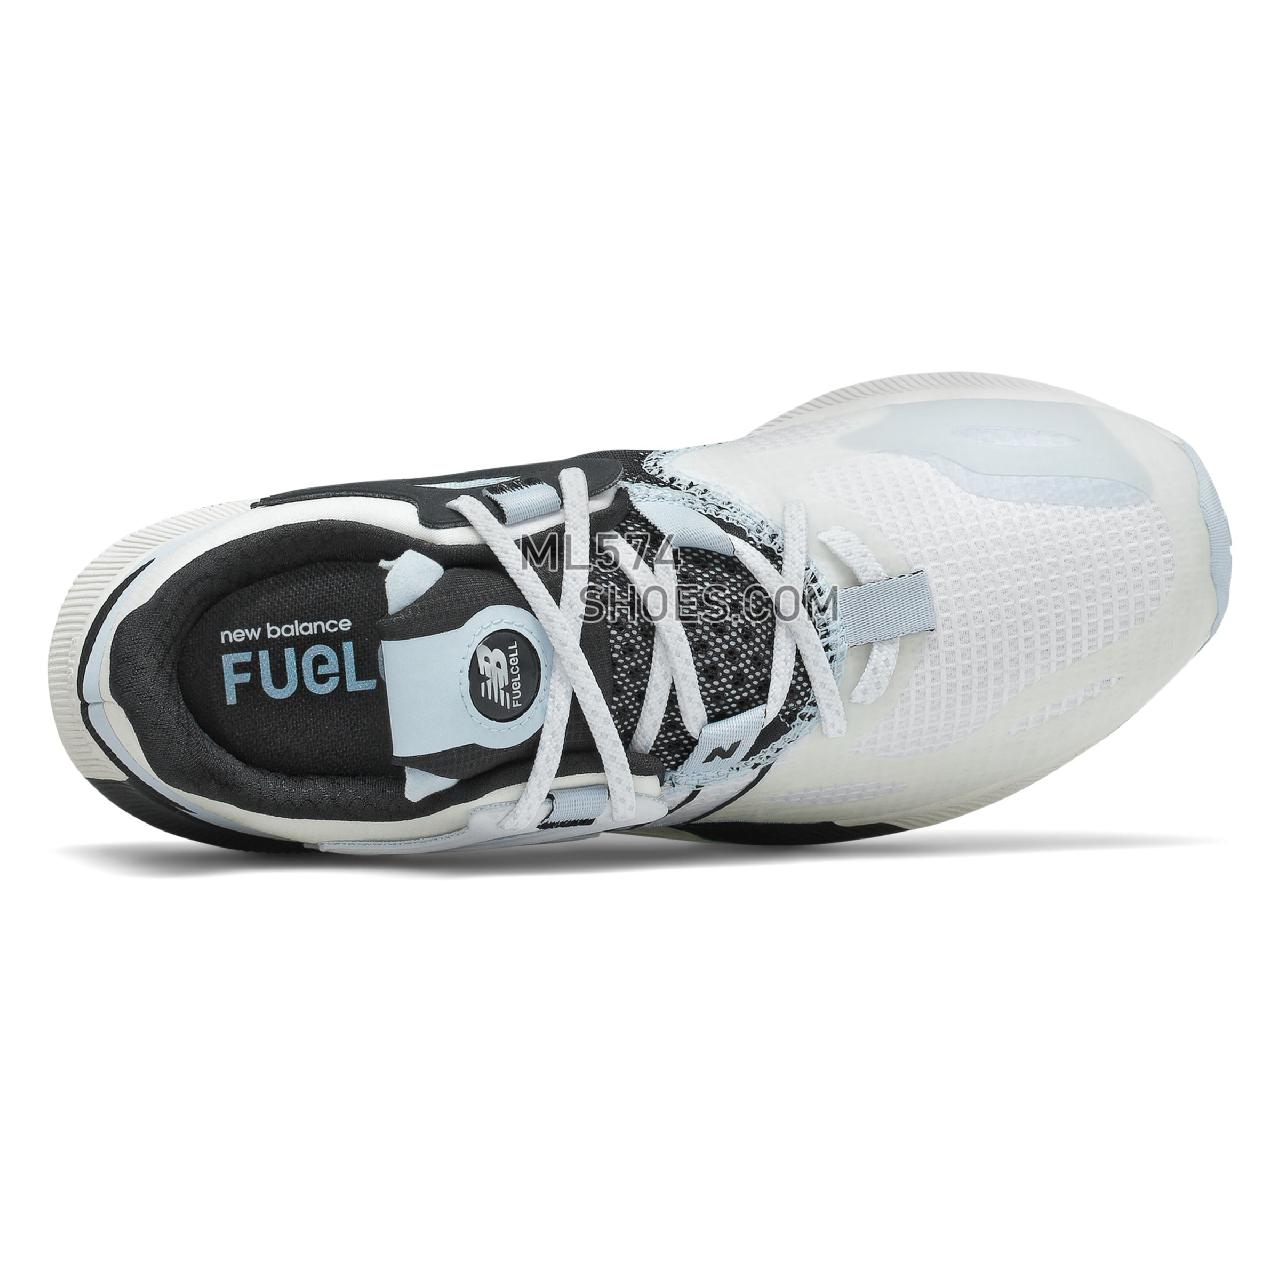 New Balance FuelCell Propel RMX - Women's Neutral Running - White with Uv Glo and Black - WPRMXCW